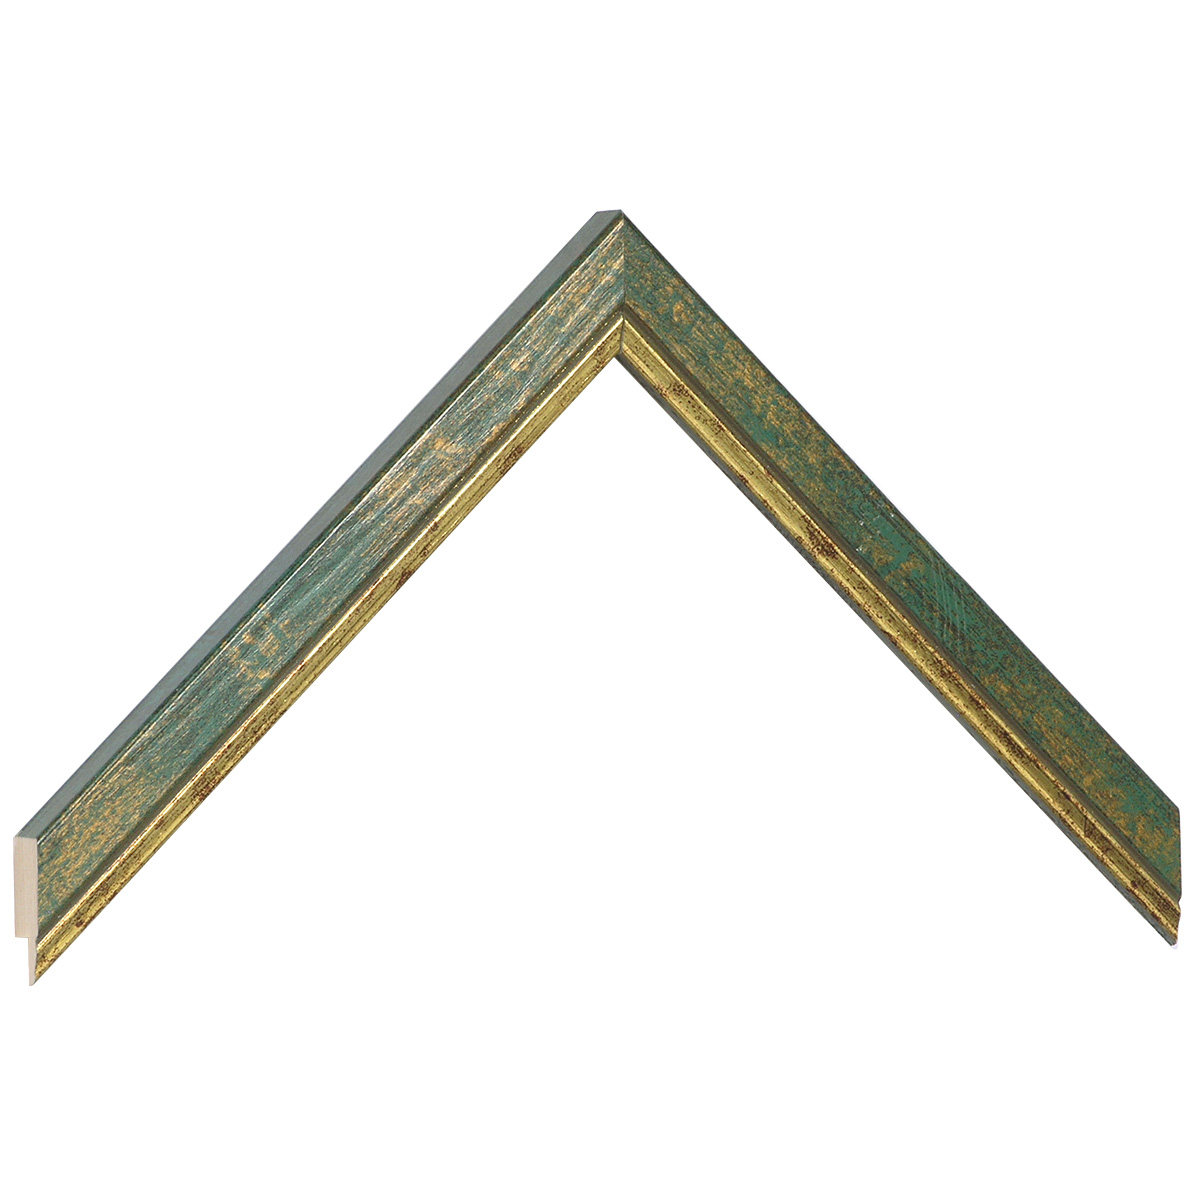 Moulding finger-jointed pine 18mm - green with gold edge - Sample